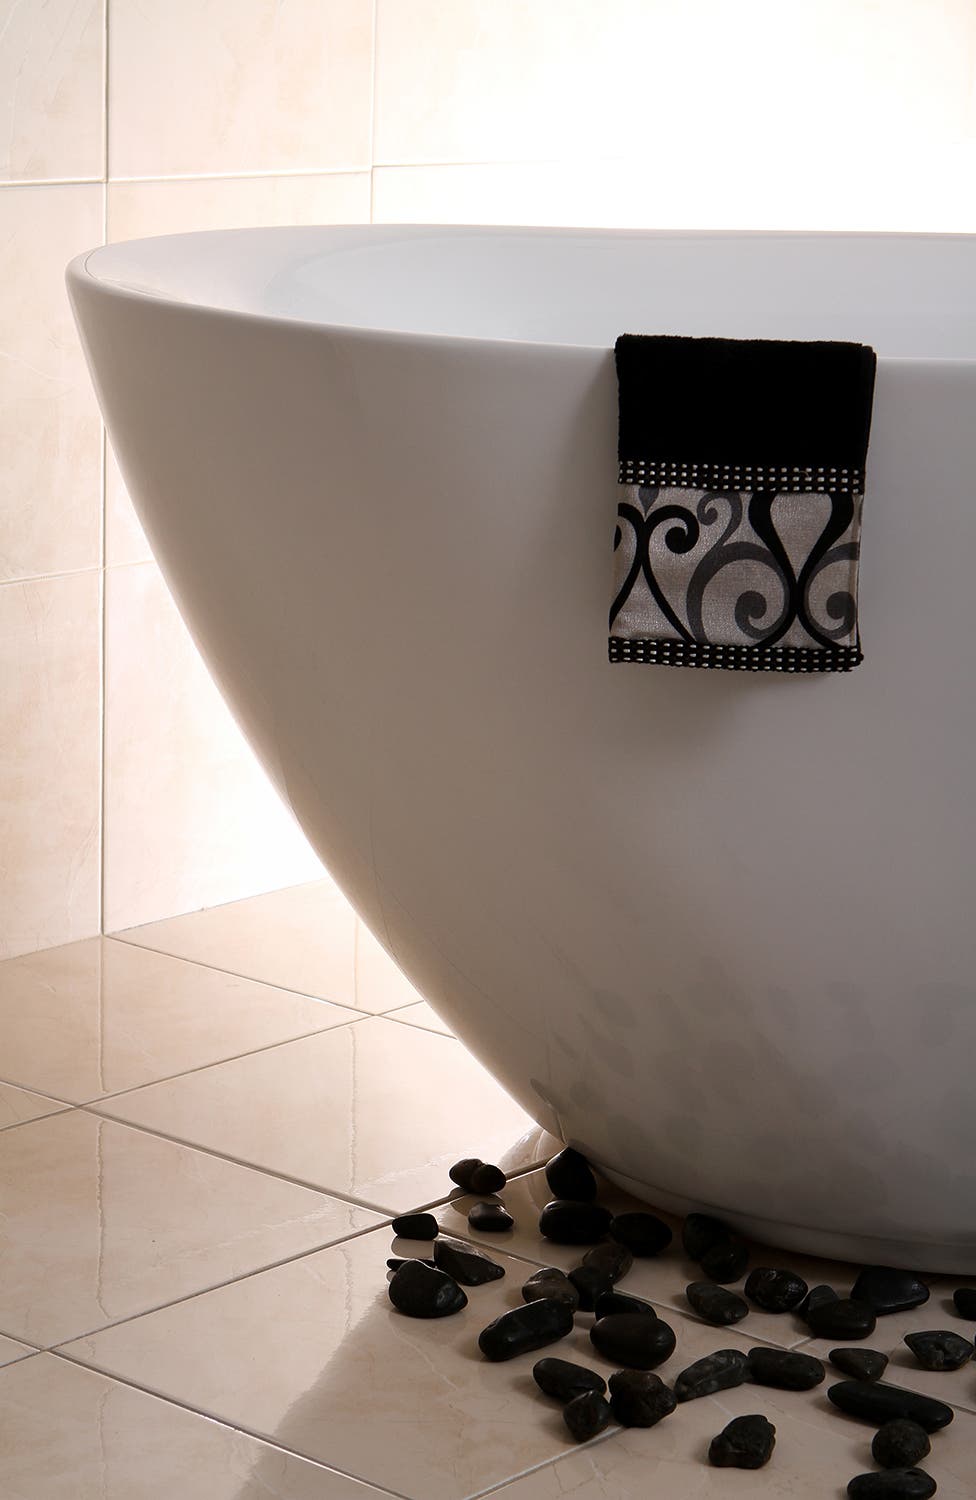 Tips for choosing the right faucet for your contemporary freestanding tub